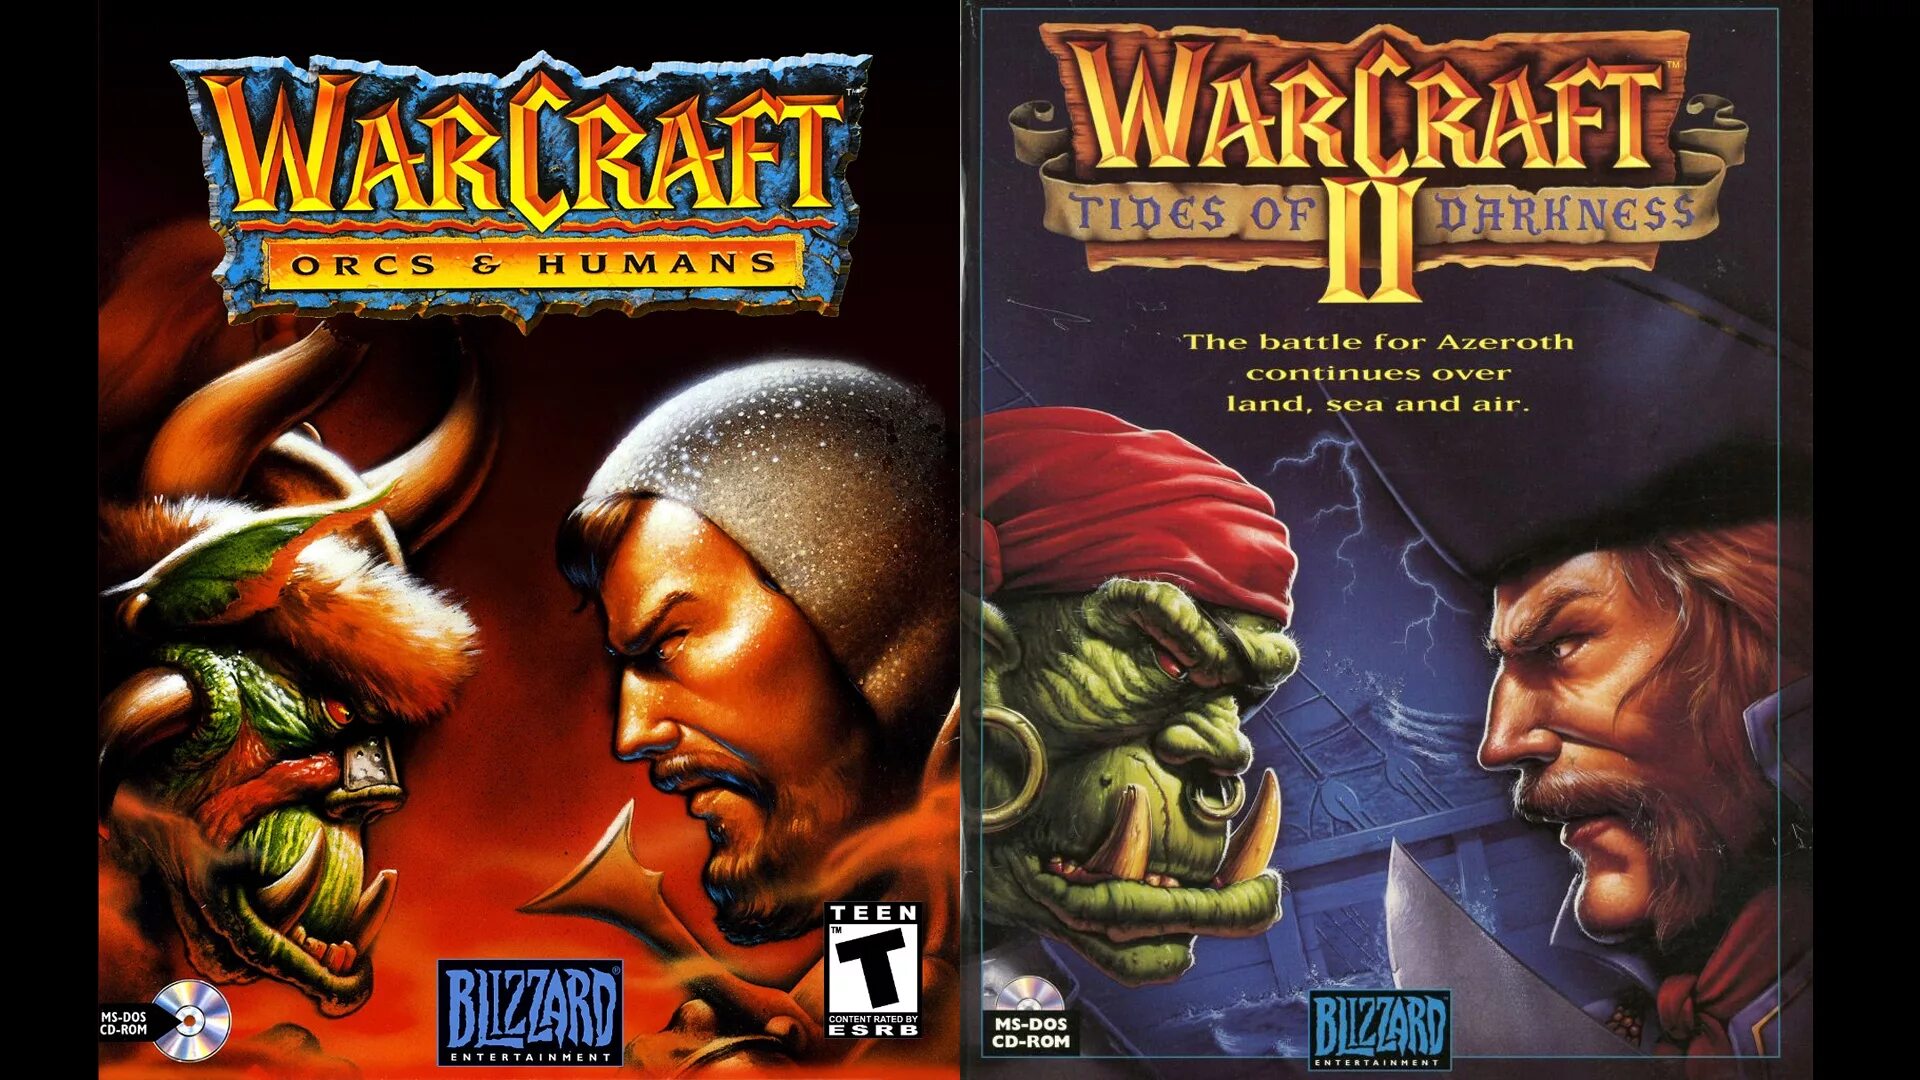 Csw tides of darkness. Warcraft II: Tides of Darkness. Warcraft 2 ps1 обложка. Warcraft II Tides of Darkness 1995. Warcraft 2 Tides of Darkness обложка.